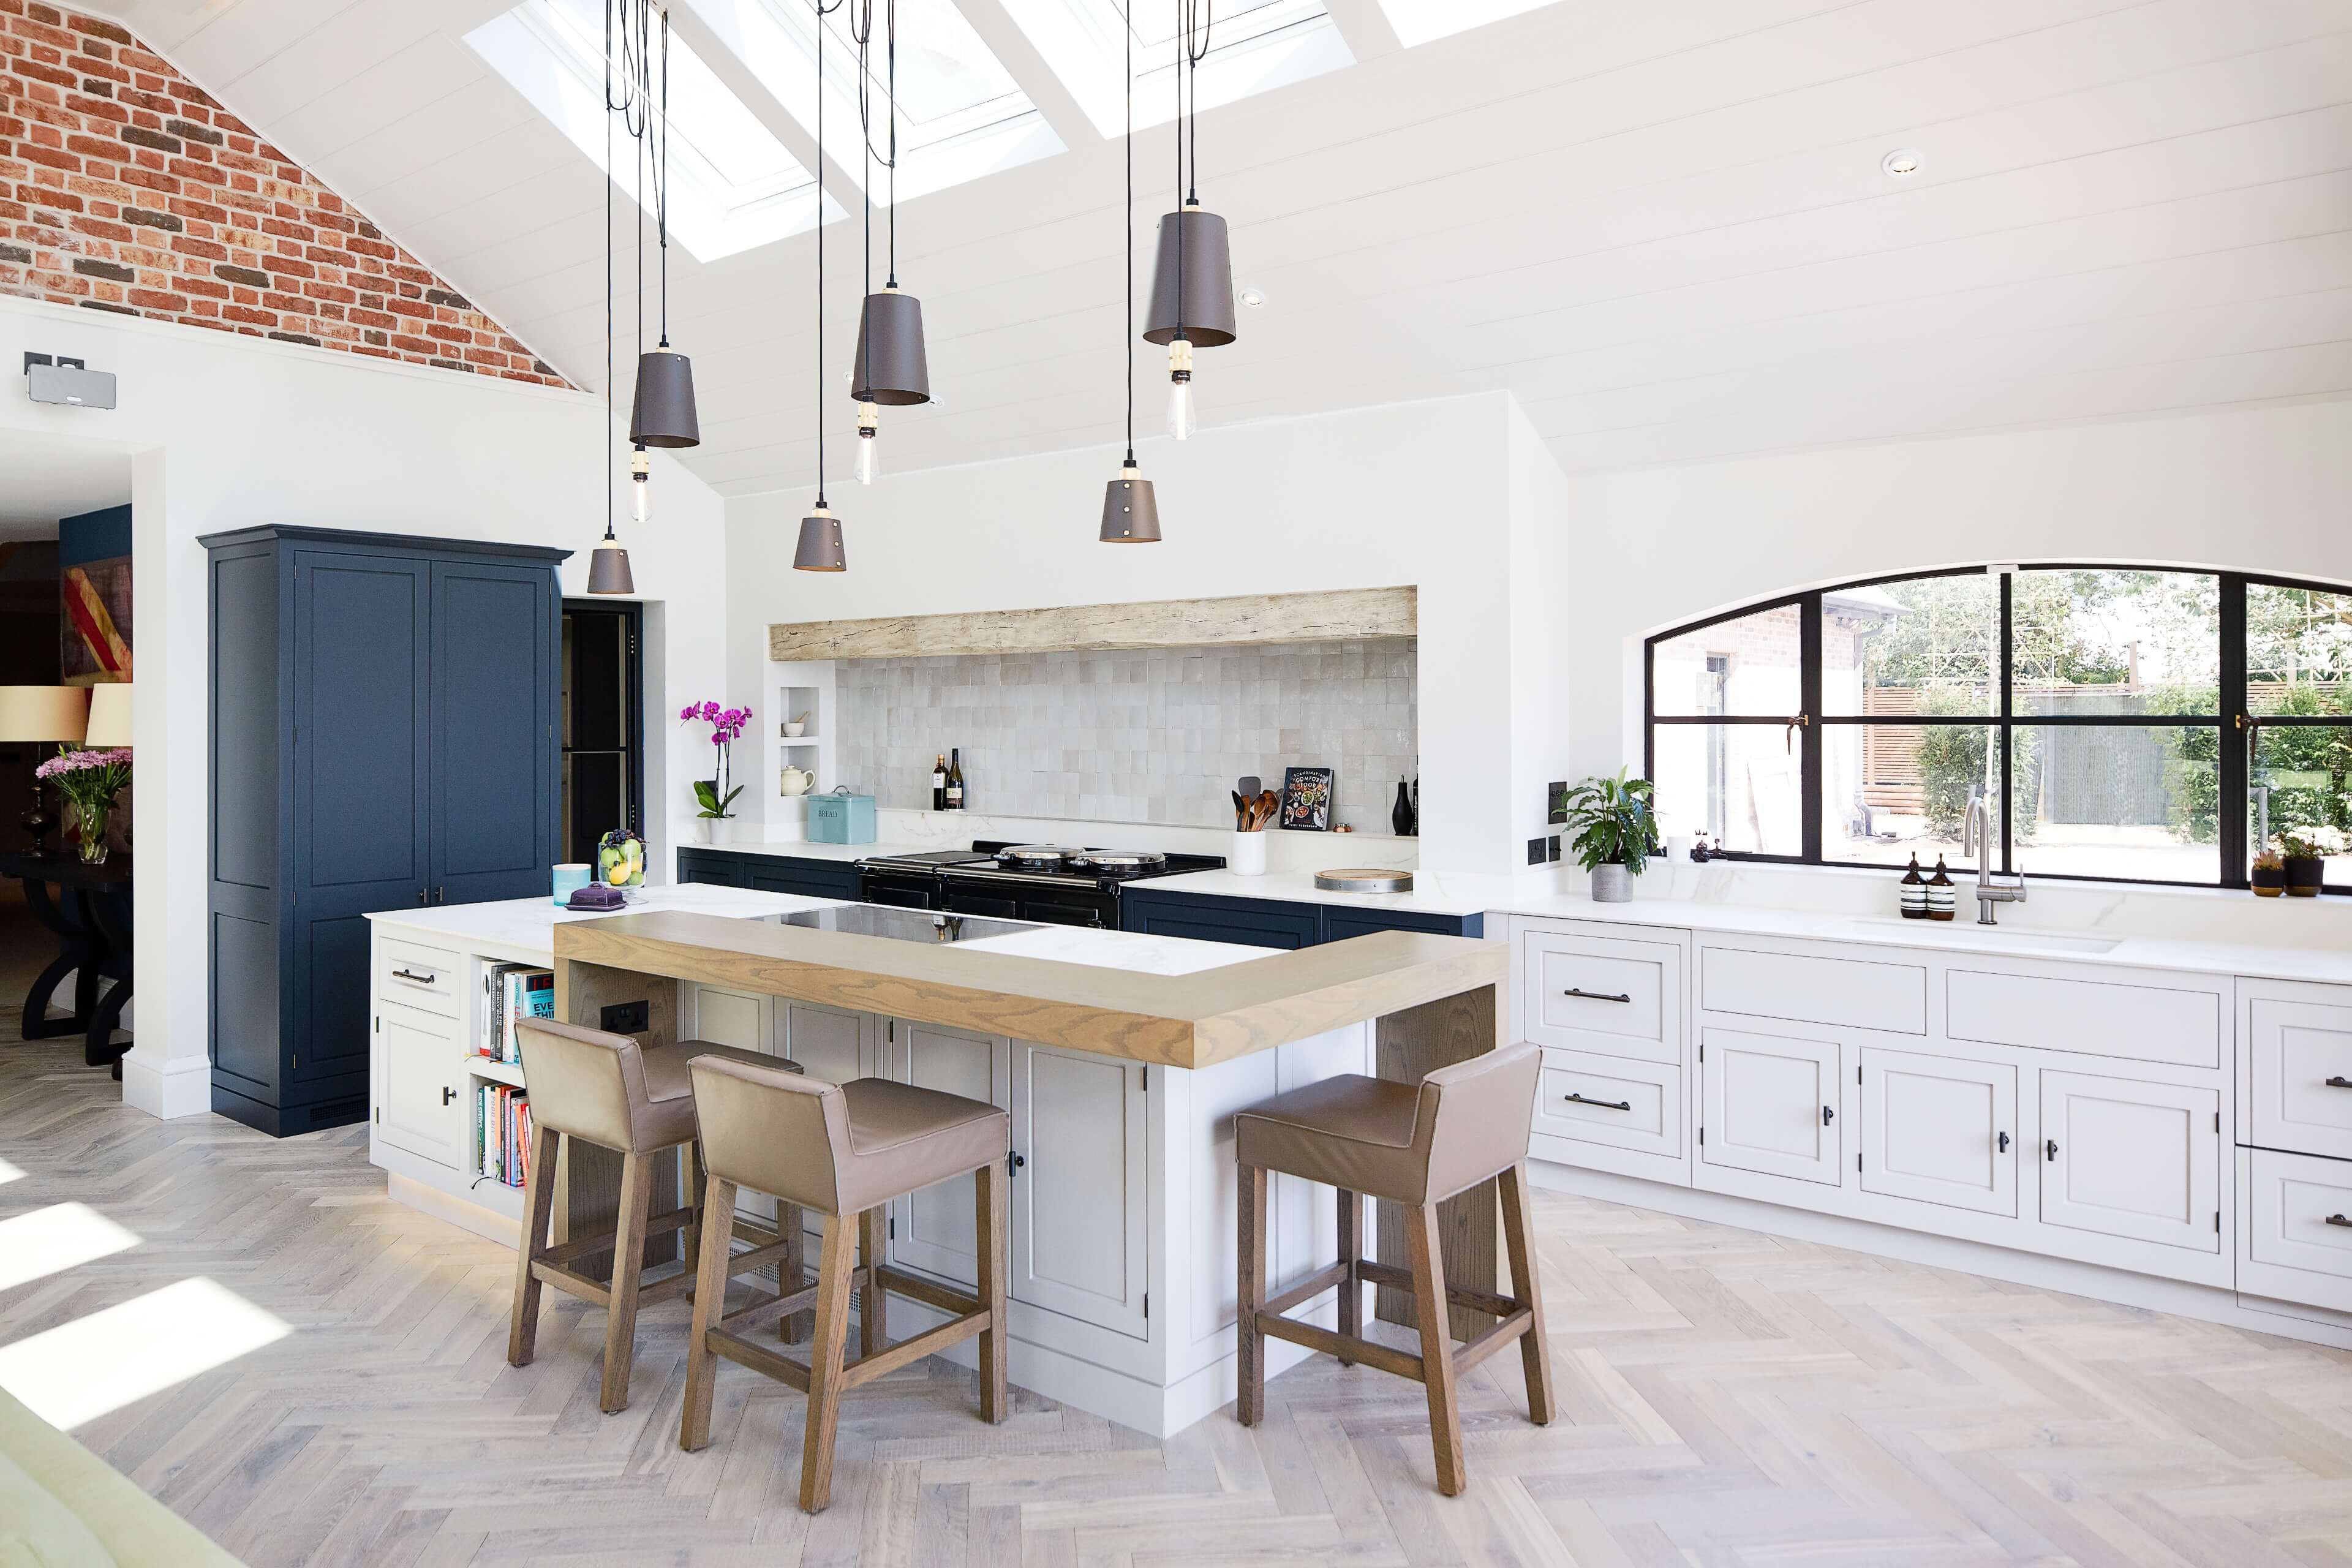 A bespoke kitchen by Hetherington Newman with a white painted base cabinets 